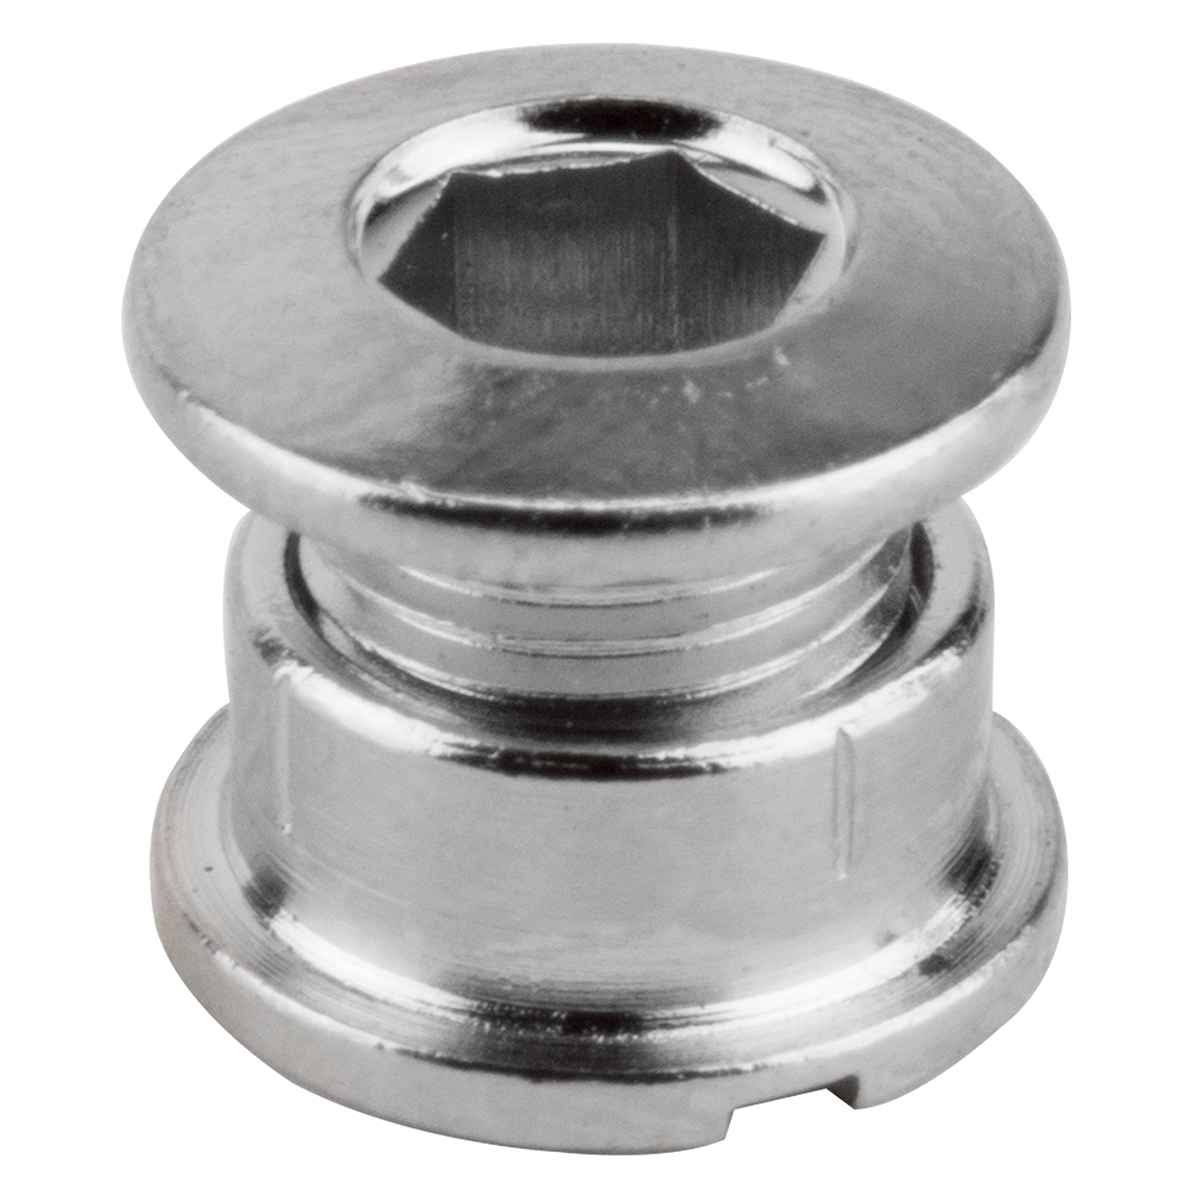 Origin8 Single-Ring Chainring Bolts - Chrome Plated, Steel